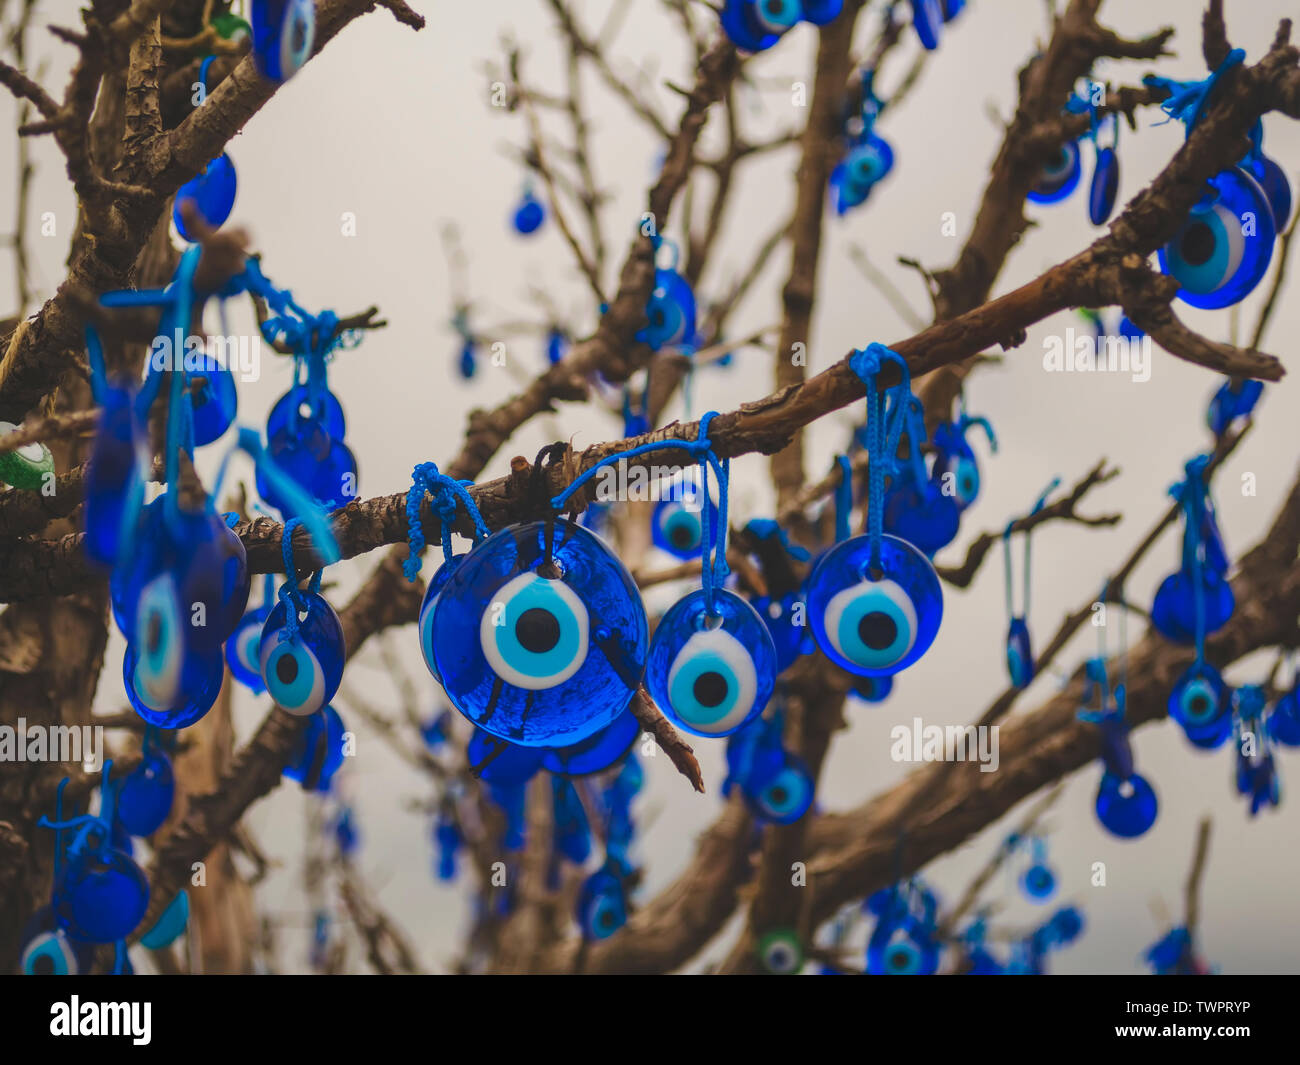 https://c8.alamy.com/comp/TWPRYP/many-traditional-turkish-amulets-nazar-boncuk-or-fatima-eye-hang-on-the-branches-of-a-wishes-tree-TWPRYP.jpg